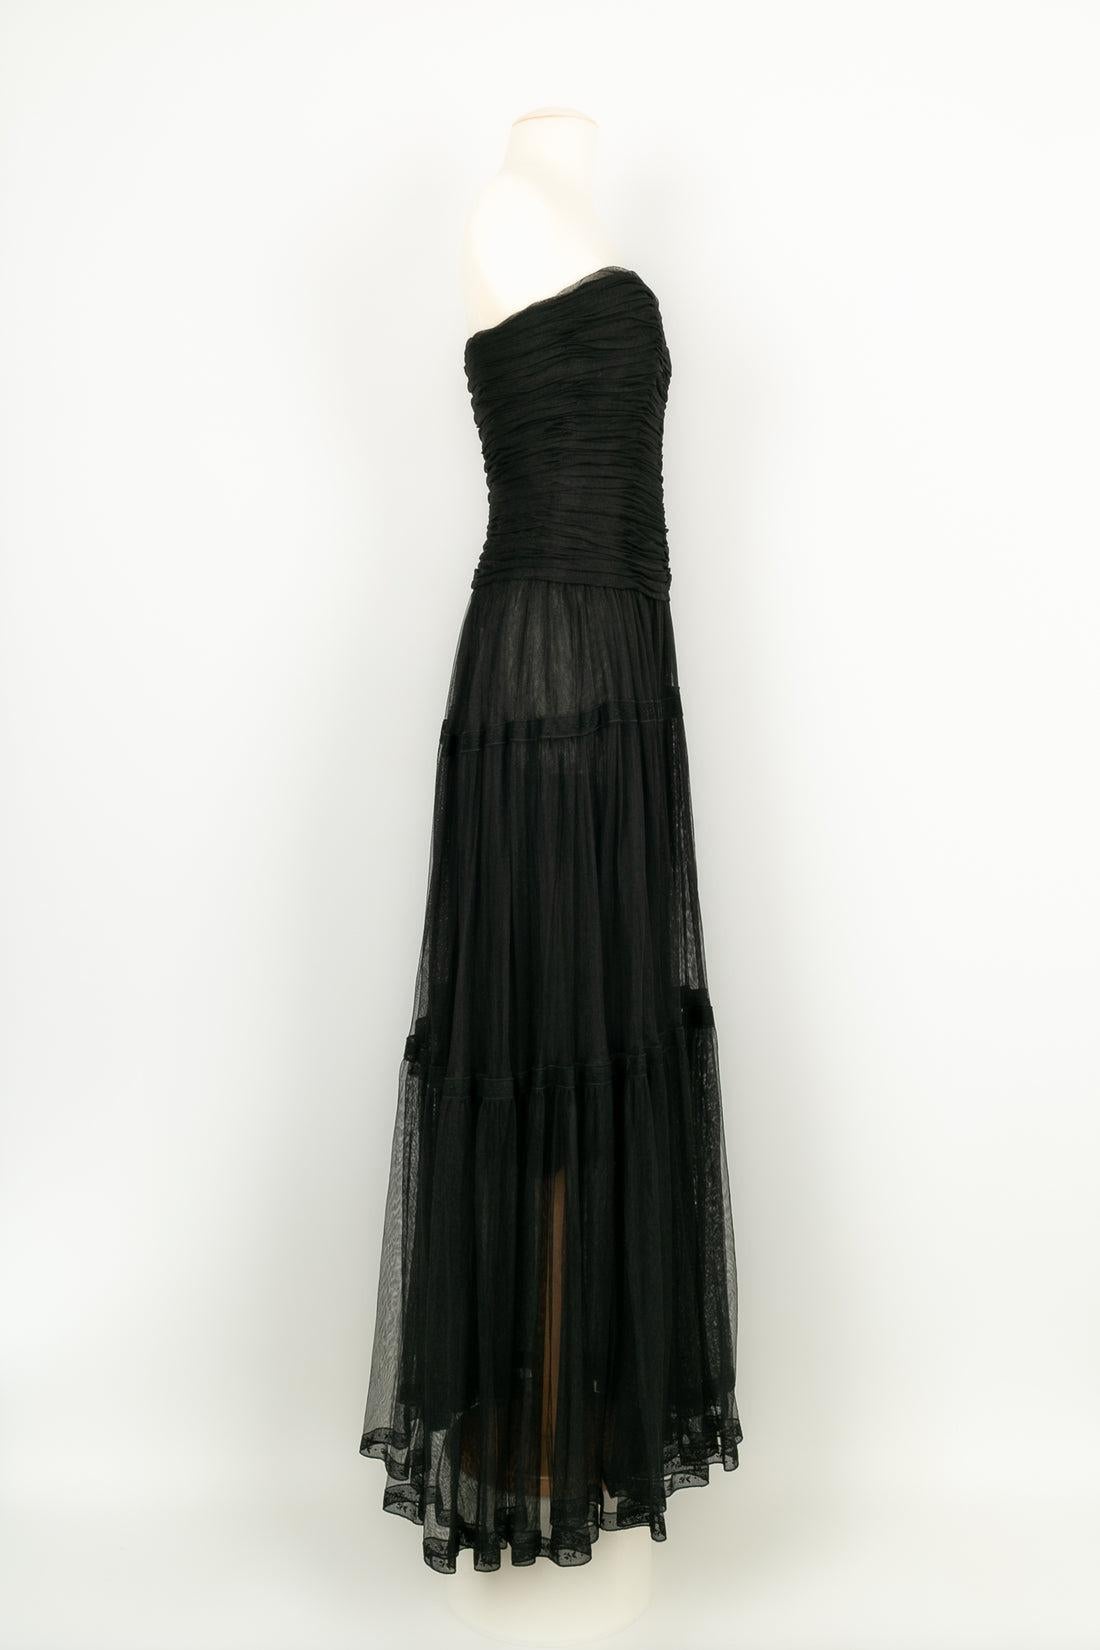 Chanel - (Made in France) Long bustier dress, in black fabric with silk lining. Indicated size 40FR. 2cc6 Collection.

Additional information:
Condition: Very good condition
Dimensions: Chest: 42 cm - Waist: 32 cm - Length: 130 cm
Period: 21st